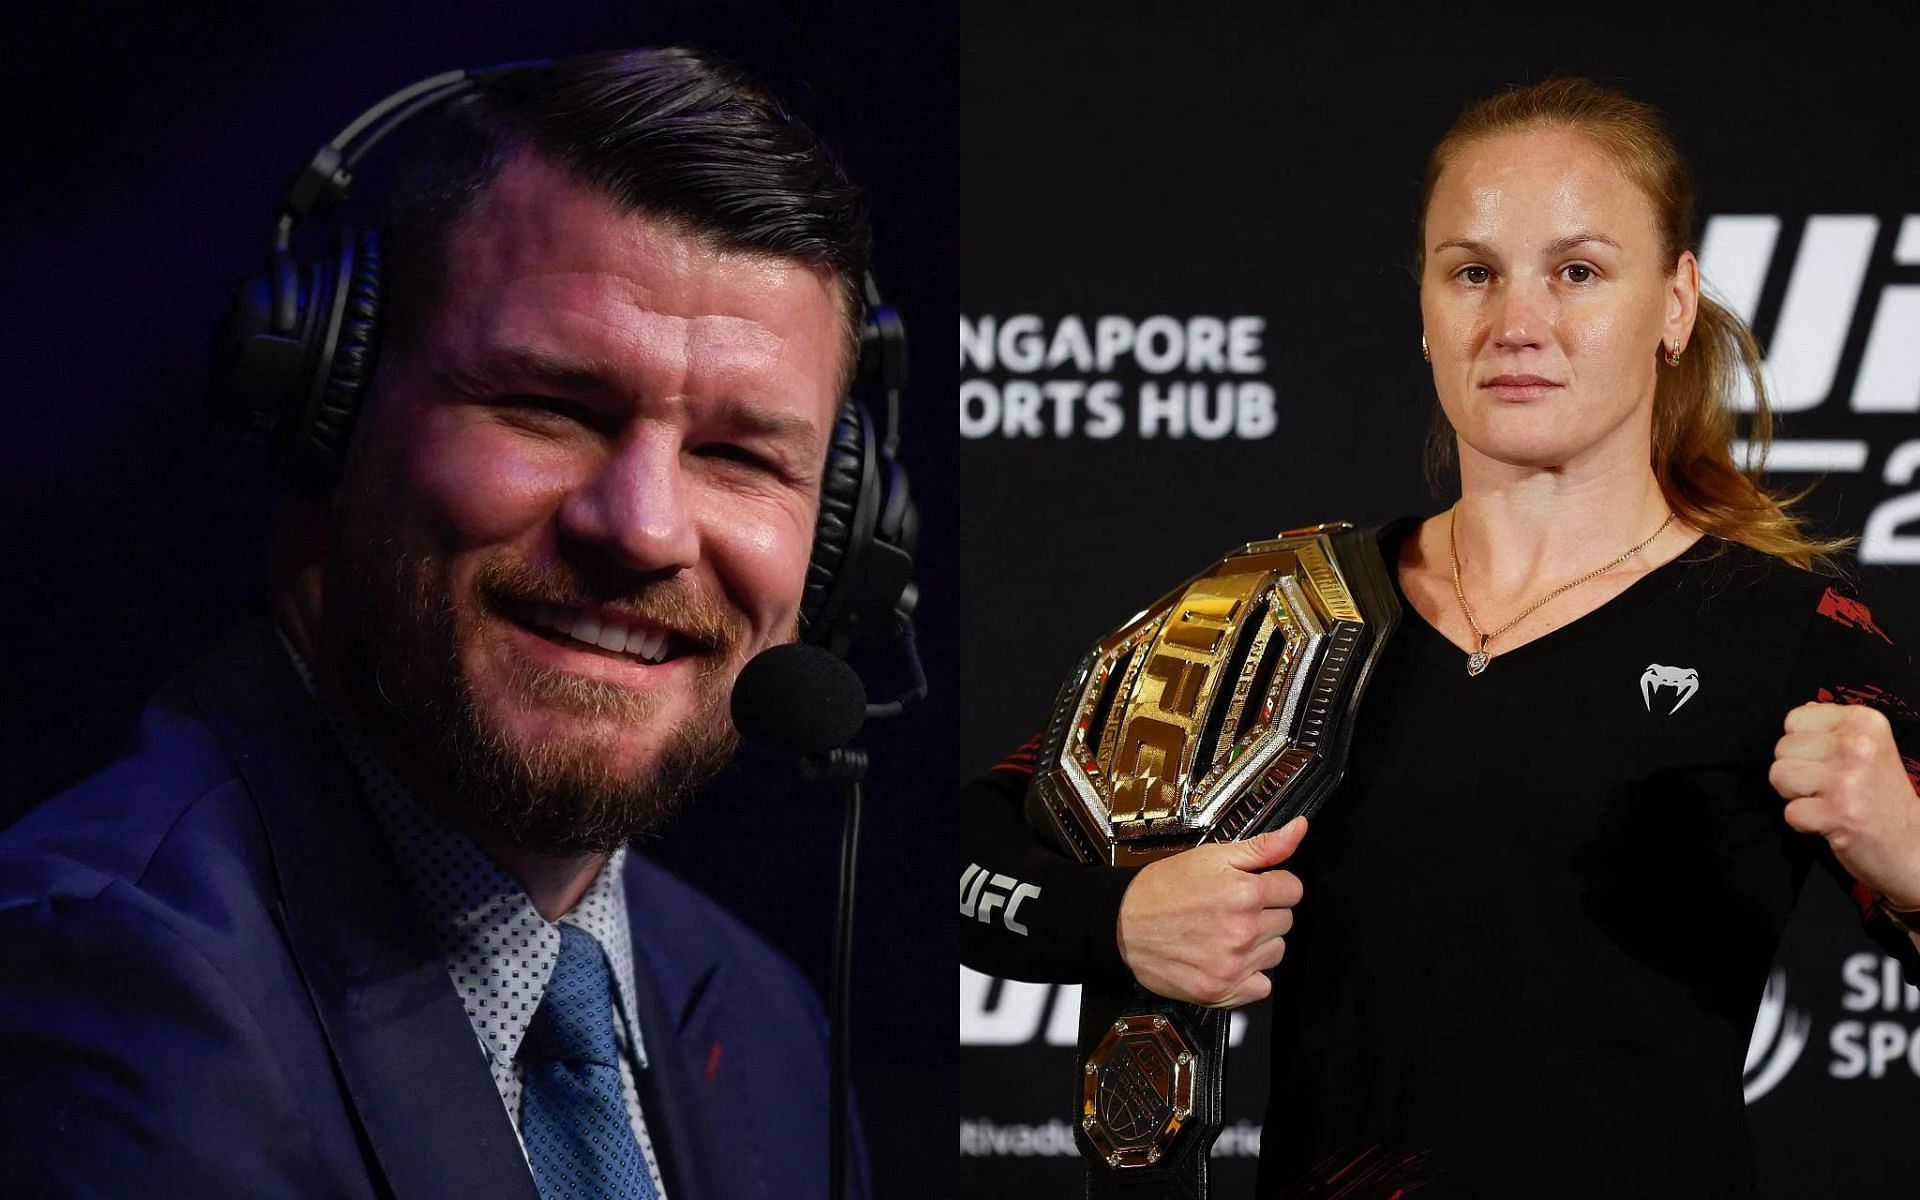 Michael Bisping (left) and Valentina Shevchenko (right) [Images courtesy of Getty]